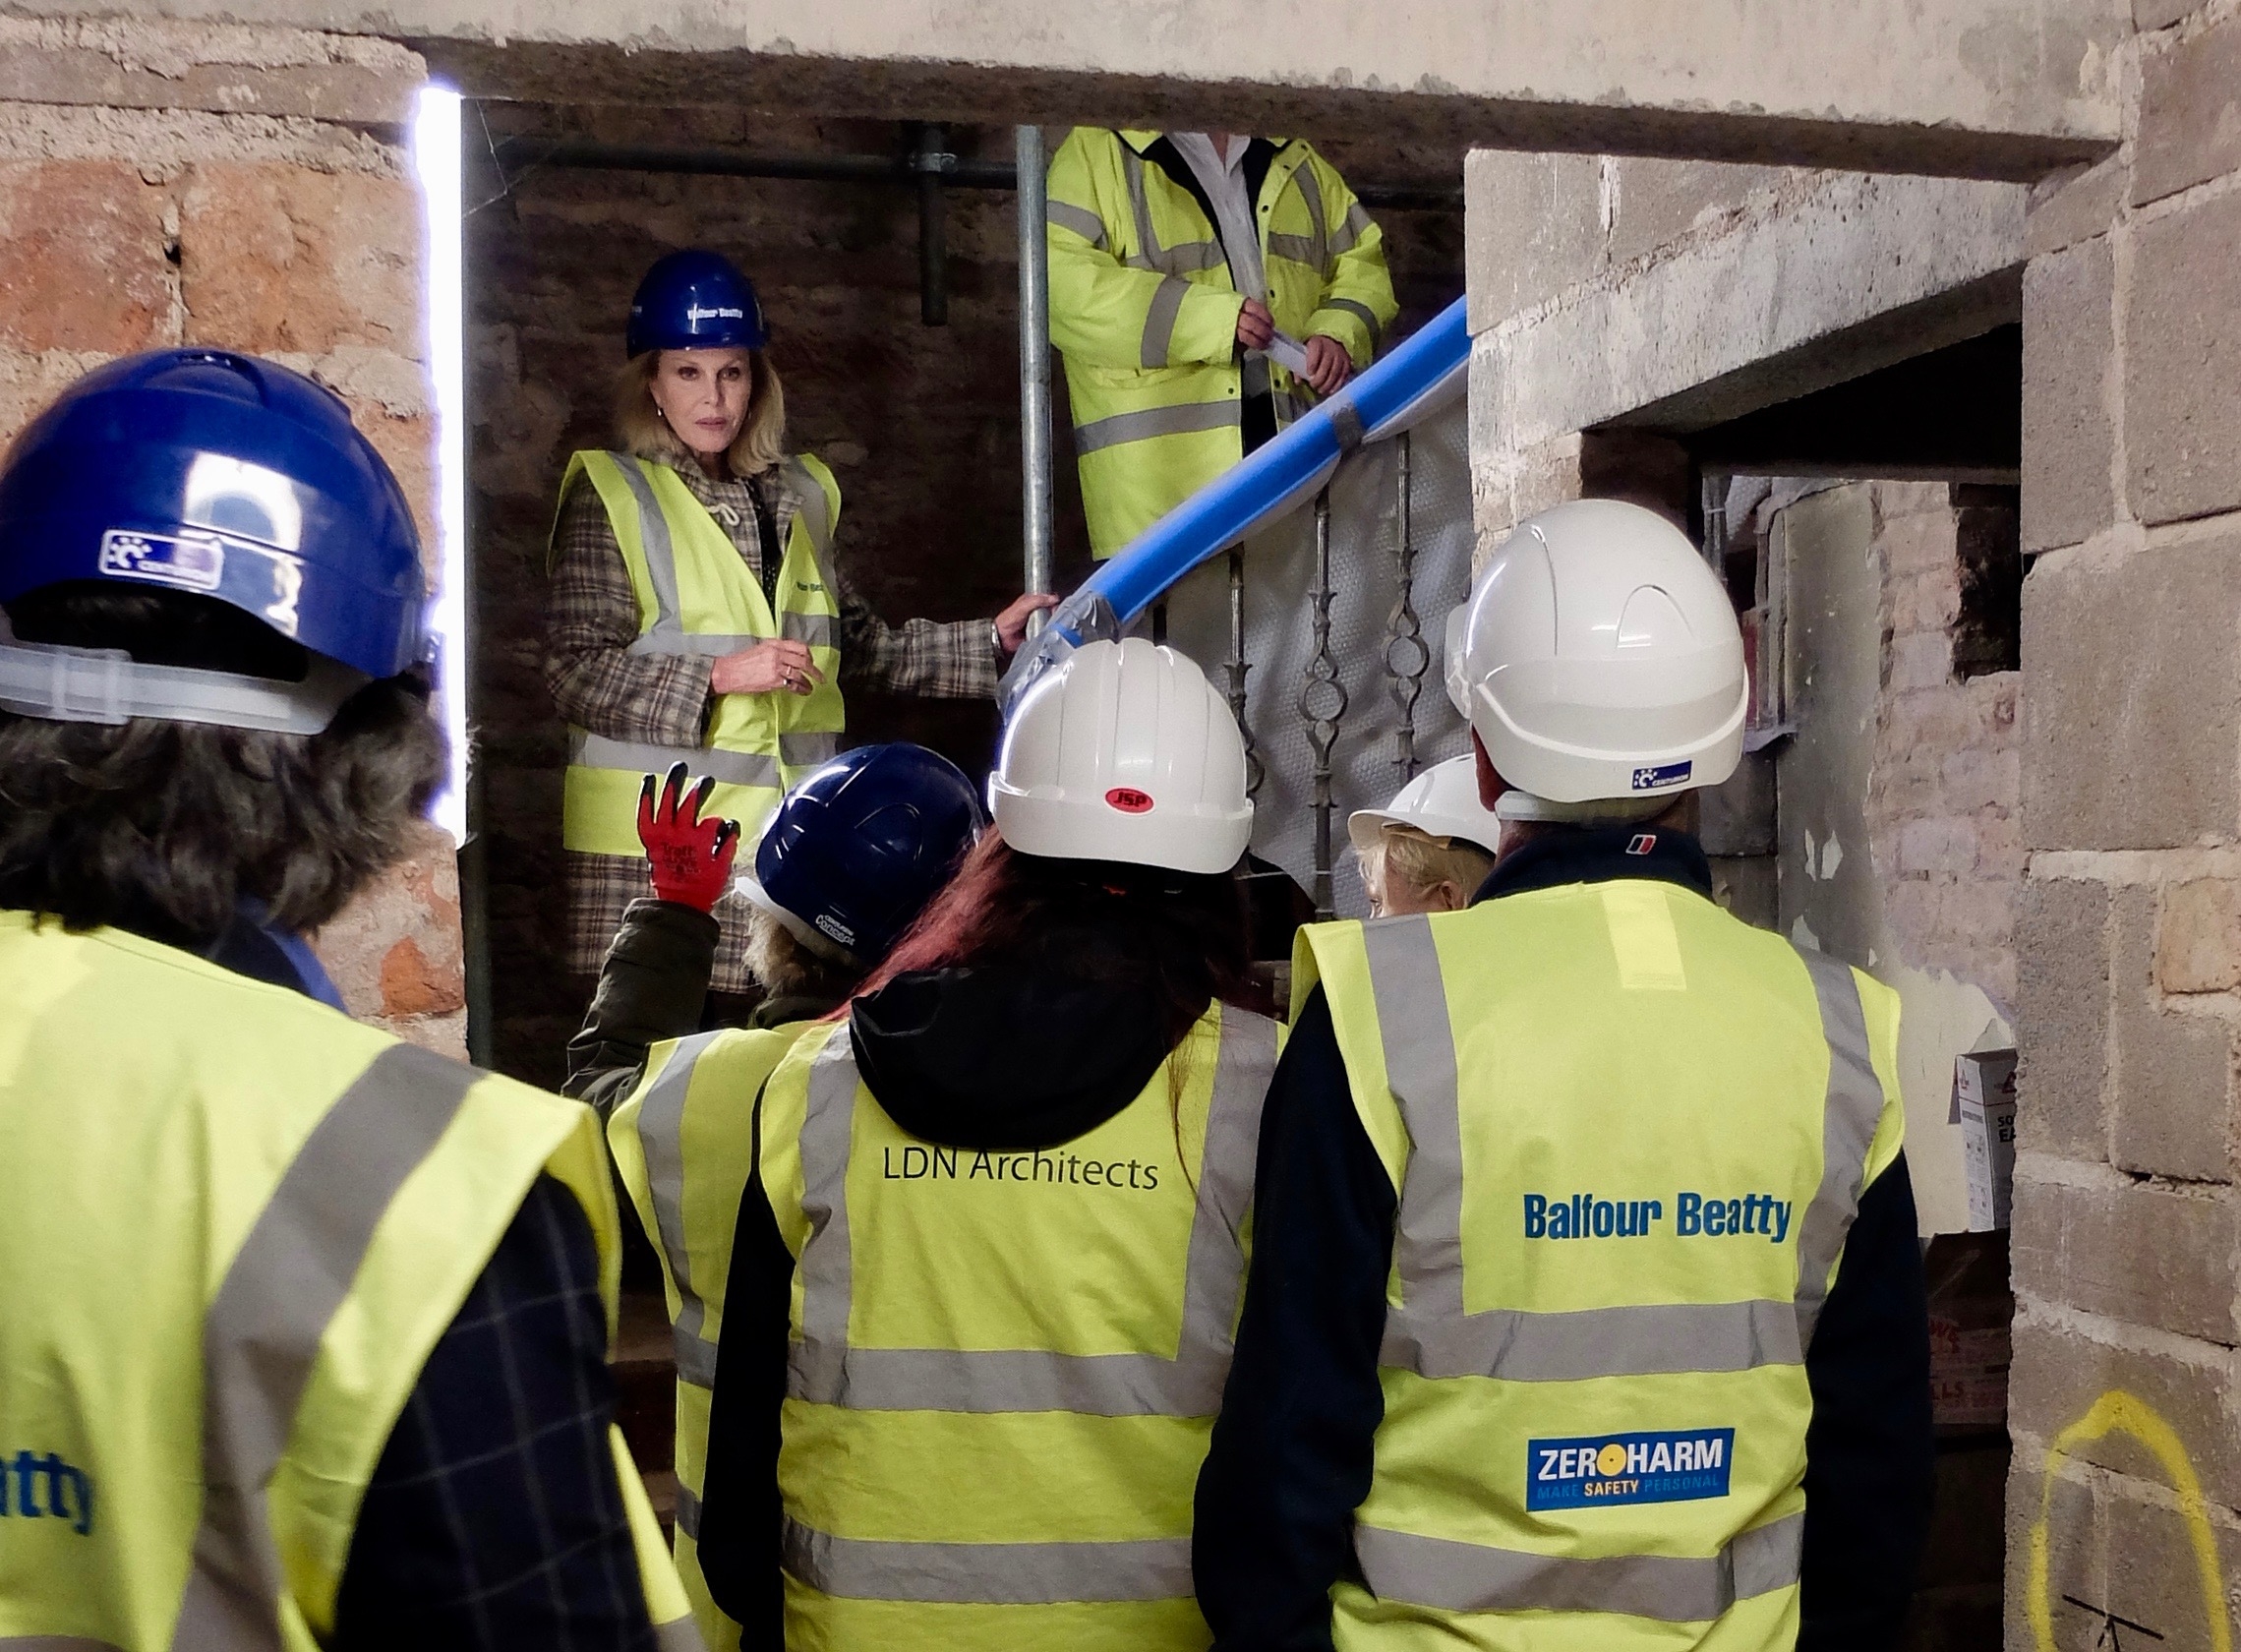 Moat Brae welcomes actress patron Joanna in site visit